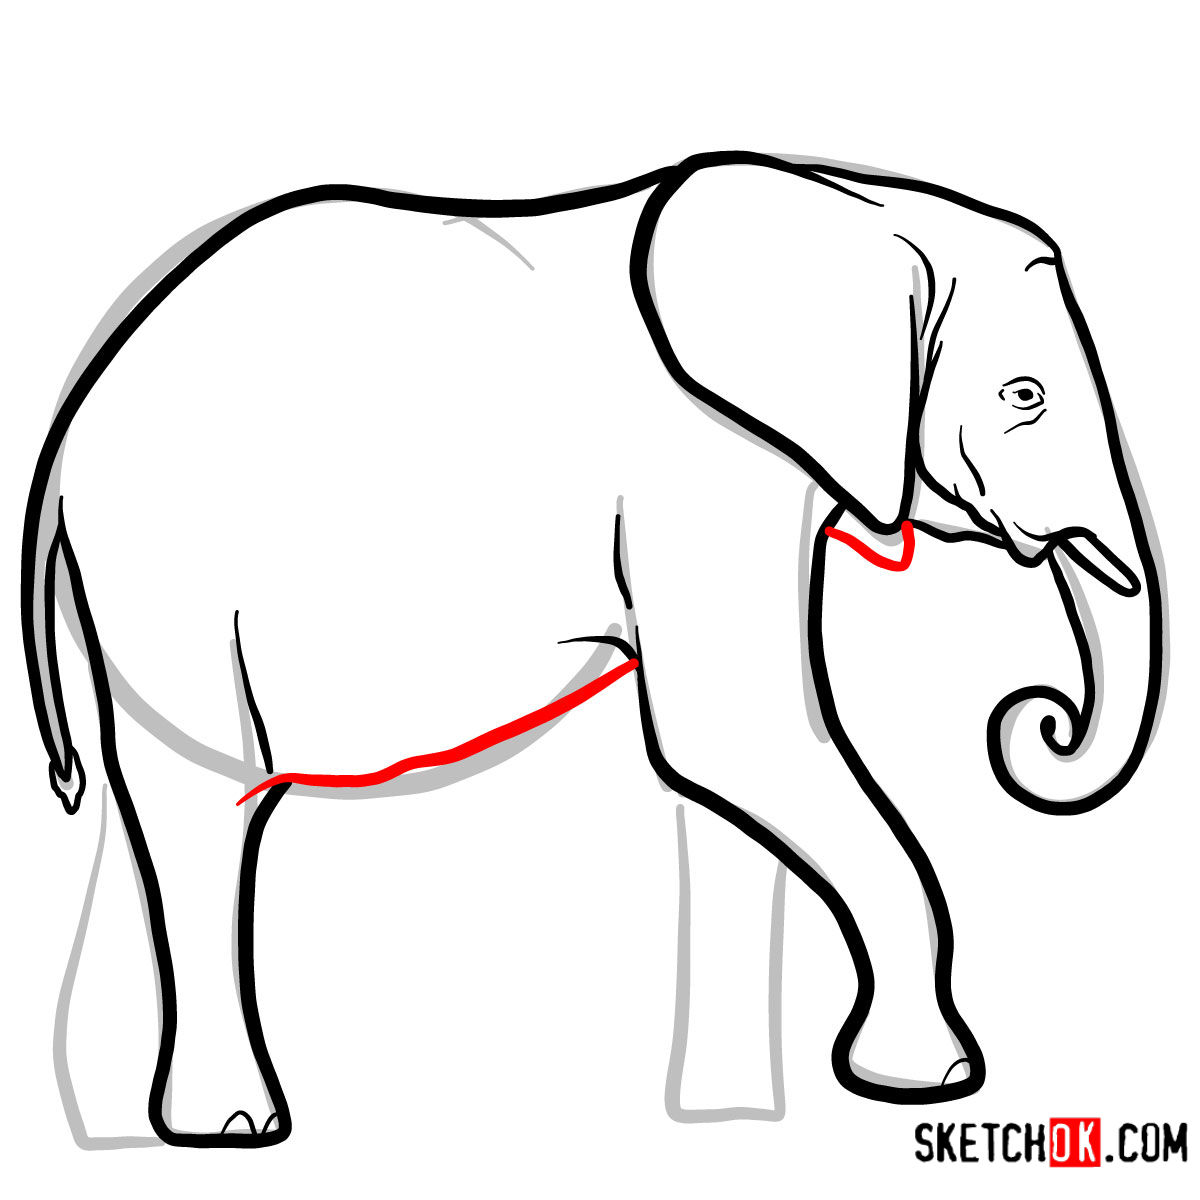 How to draw an Elephant side view | Wild Animals - Sketchok easy